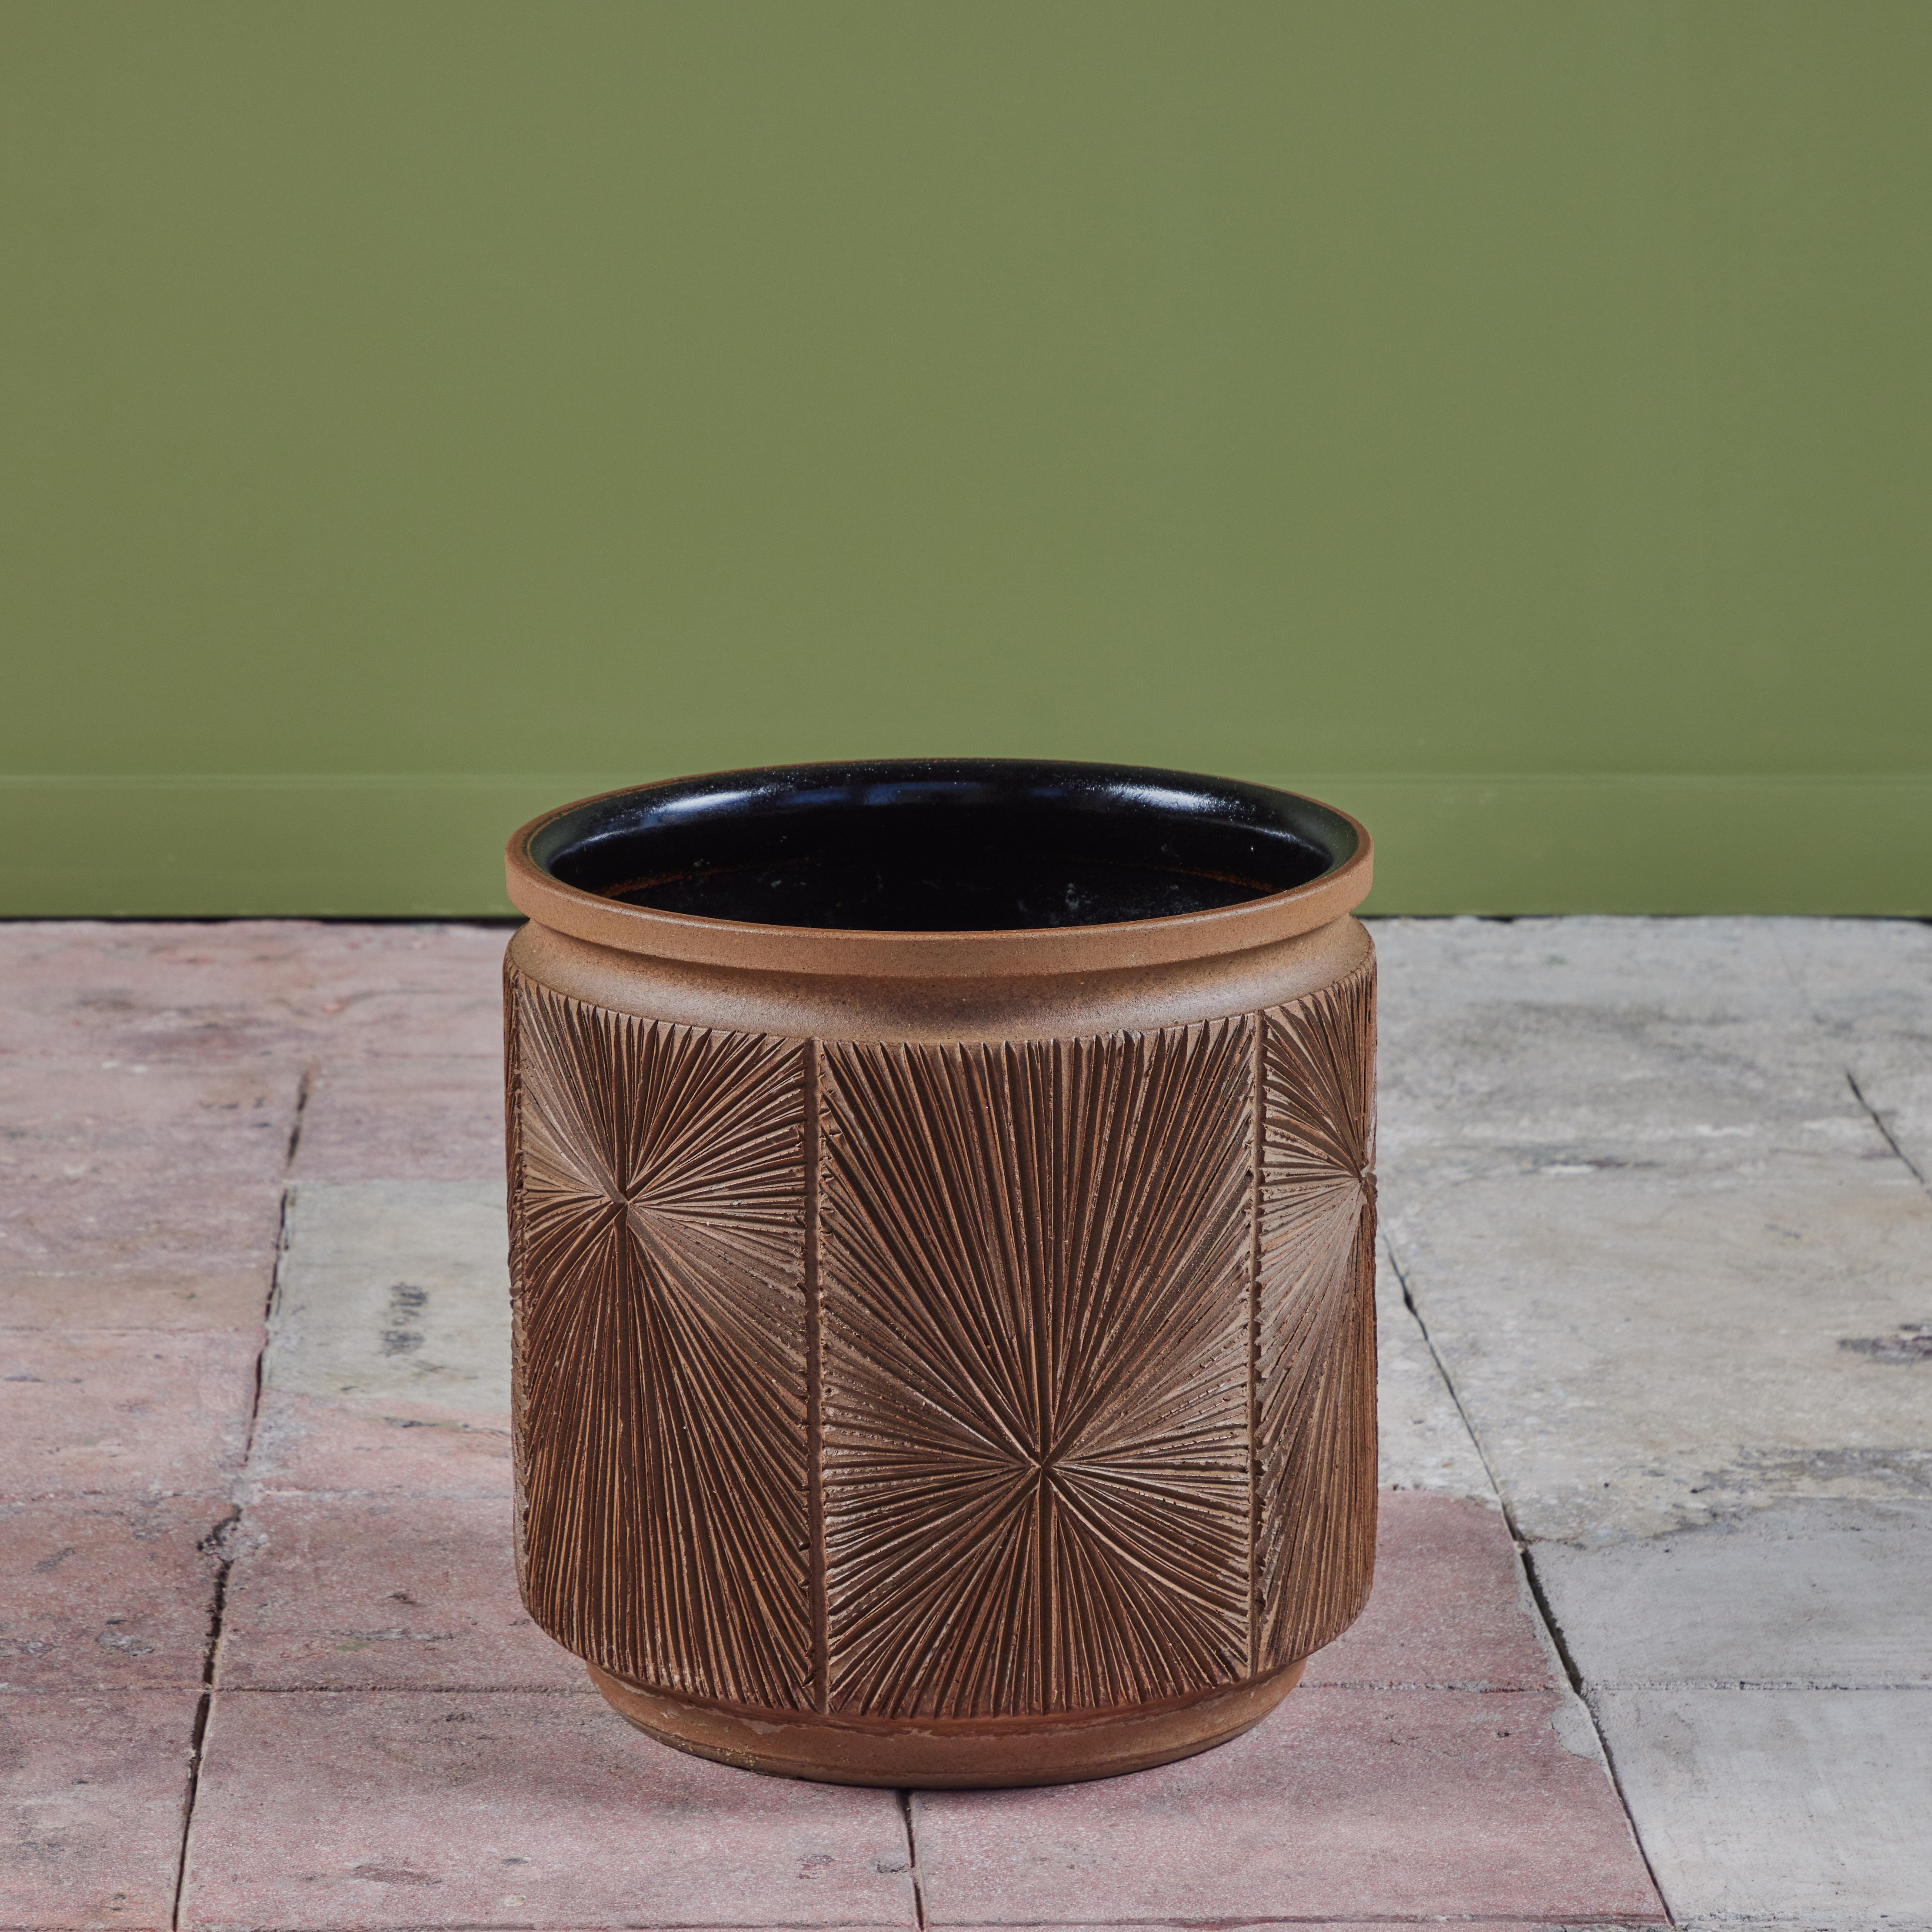 Stoneware planter from Earthgender, David Cressey and Robert Maxwell’s early 1970s project. This 15” diameter example is incised in the “Sunburst” design, a pattern of lines radiating from a central point. The interior of the planter is black